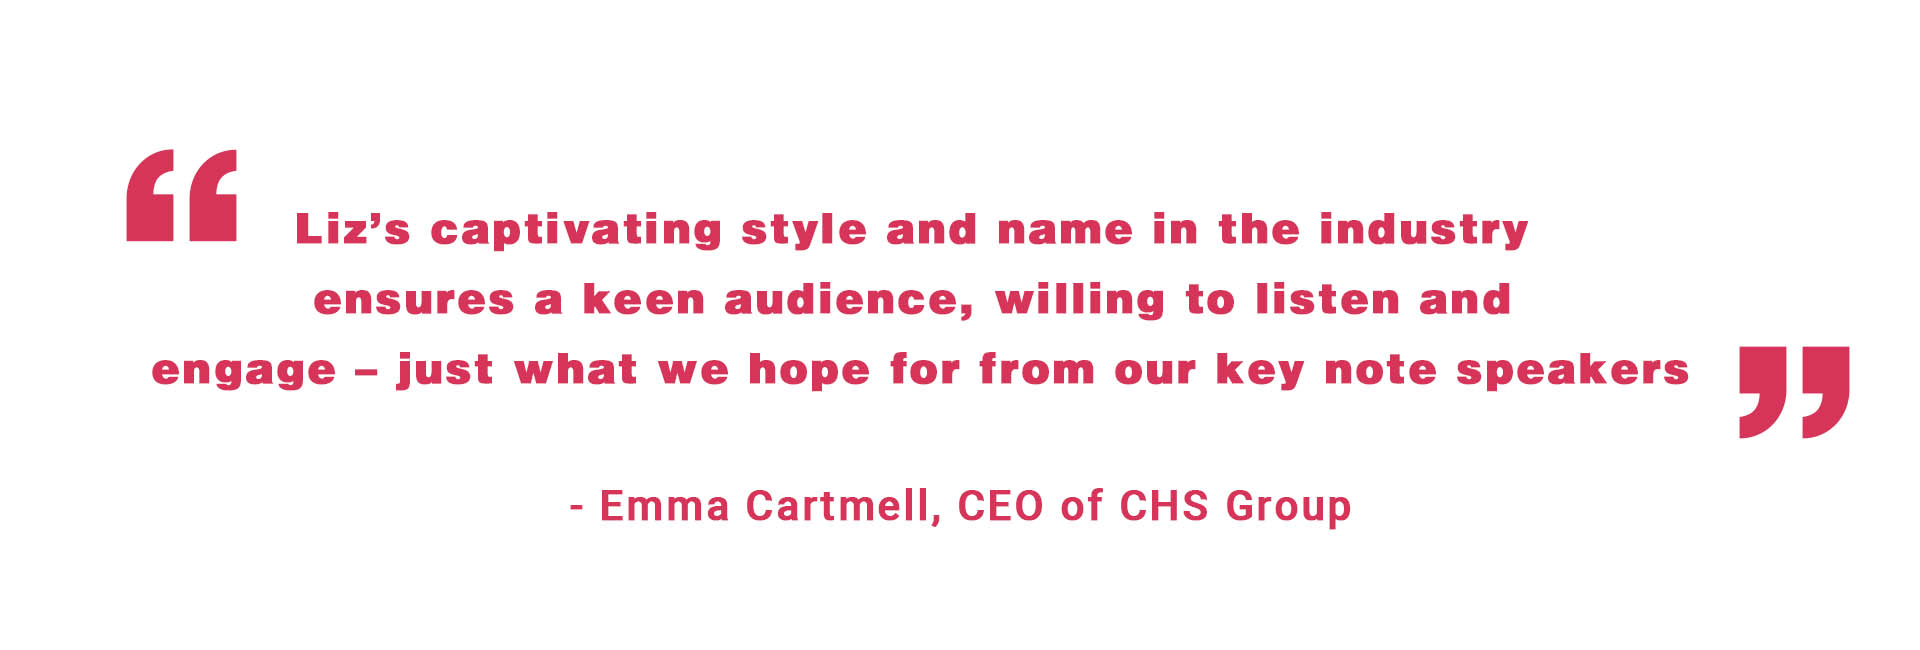 Emma Cartmell, CEO of CHS Group